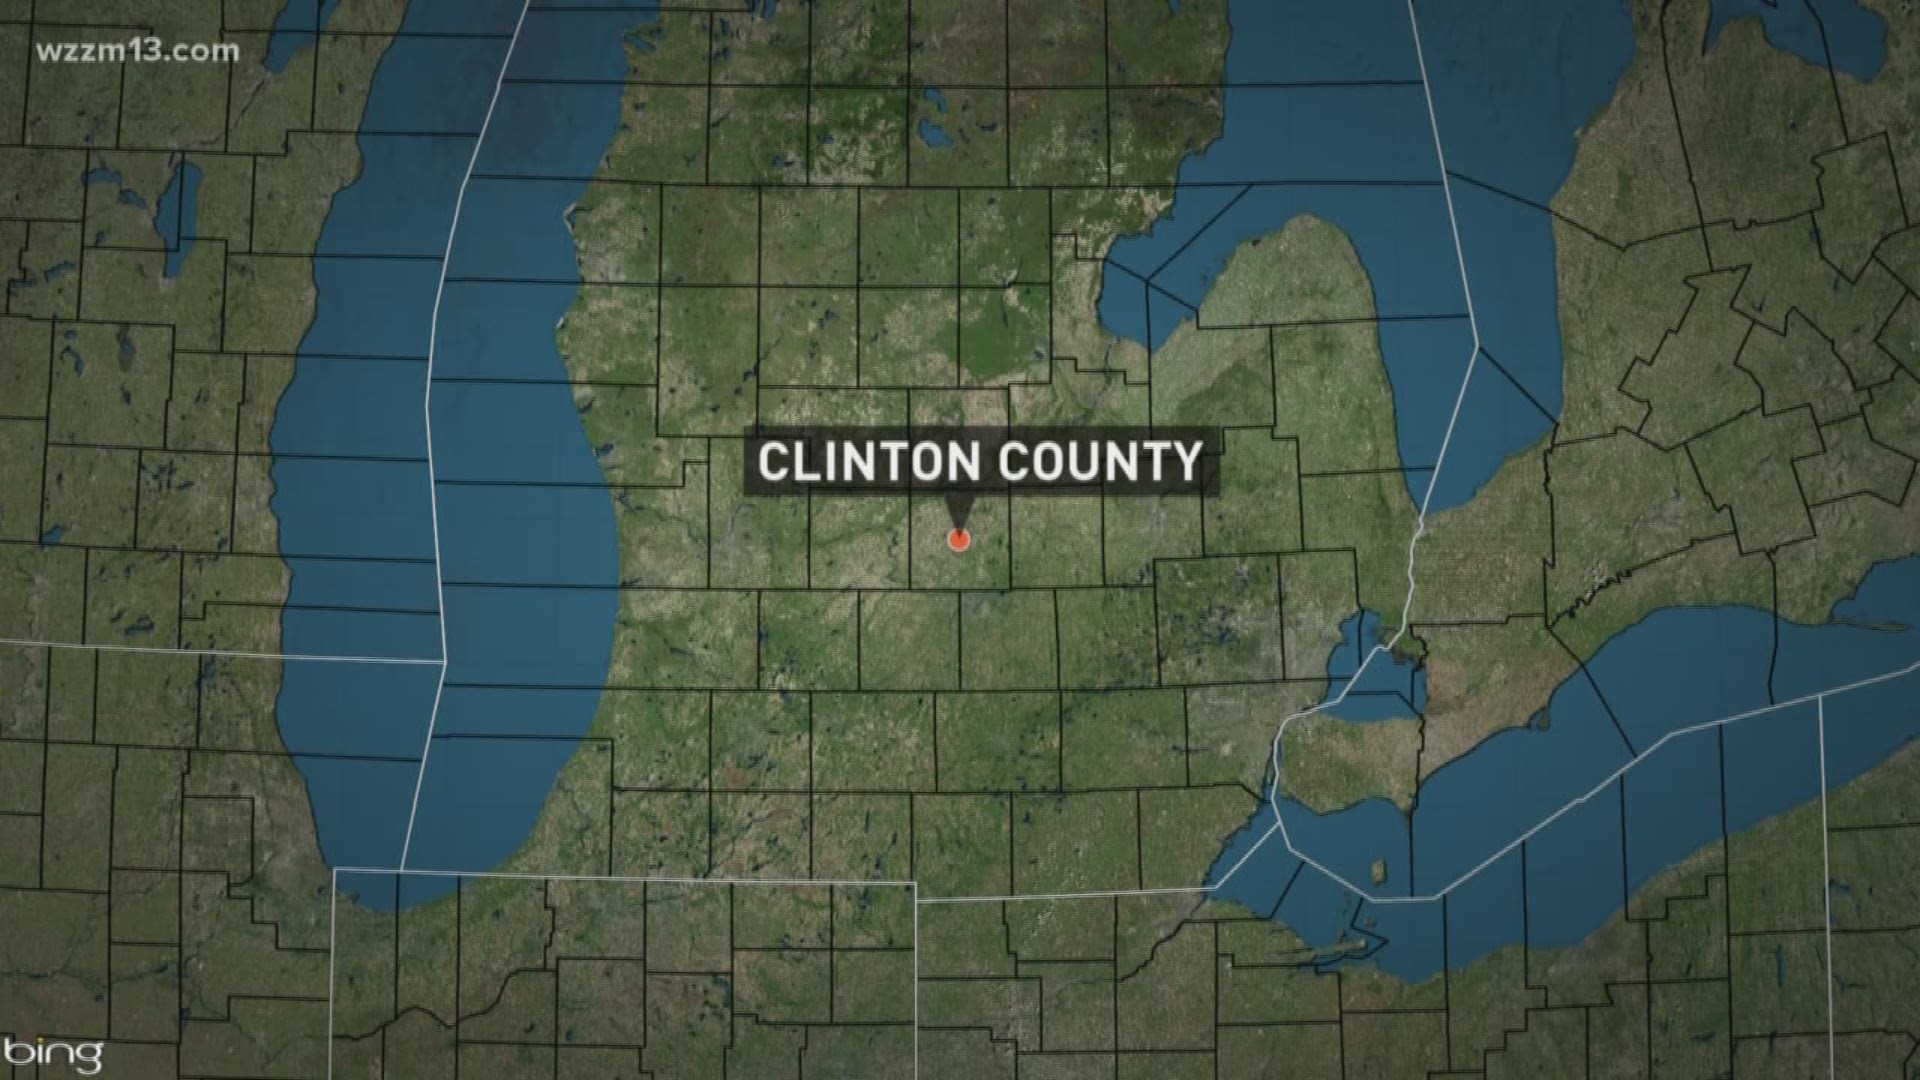 Hunter shot and killed in Clinton County